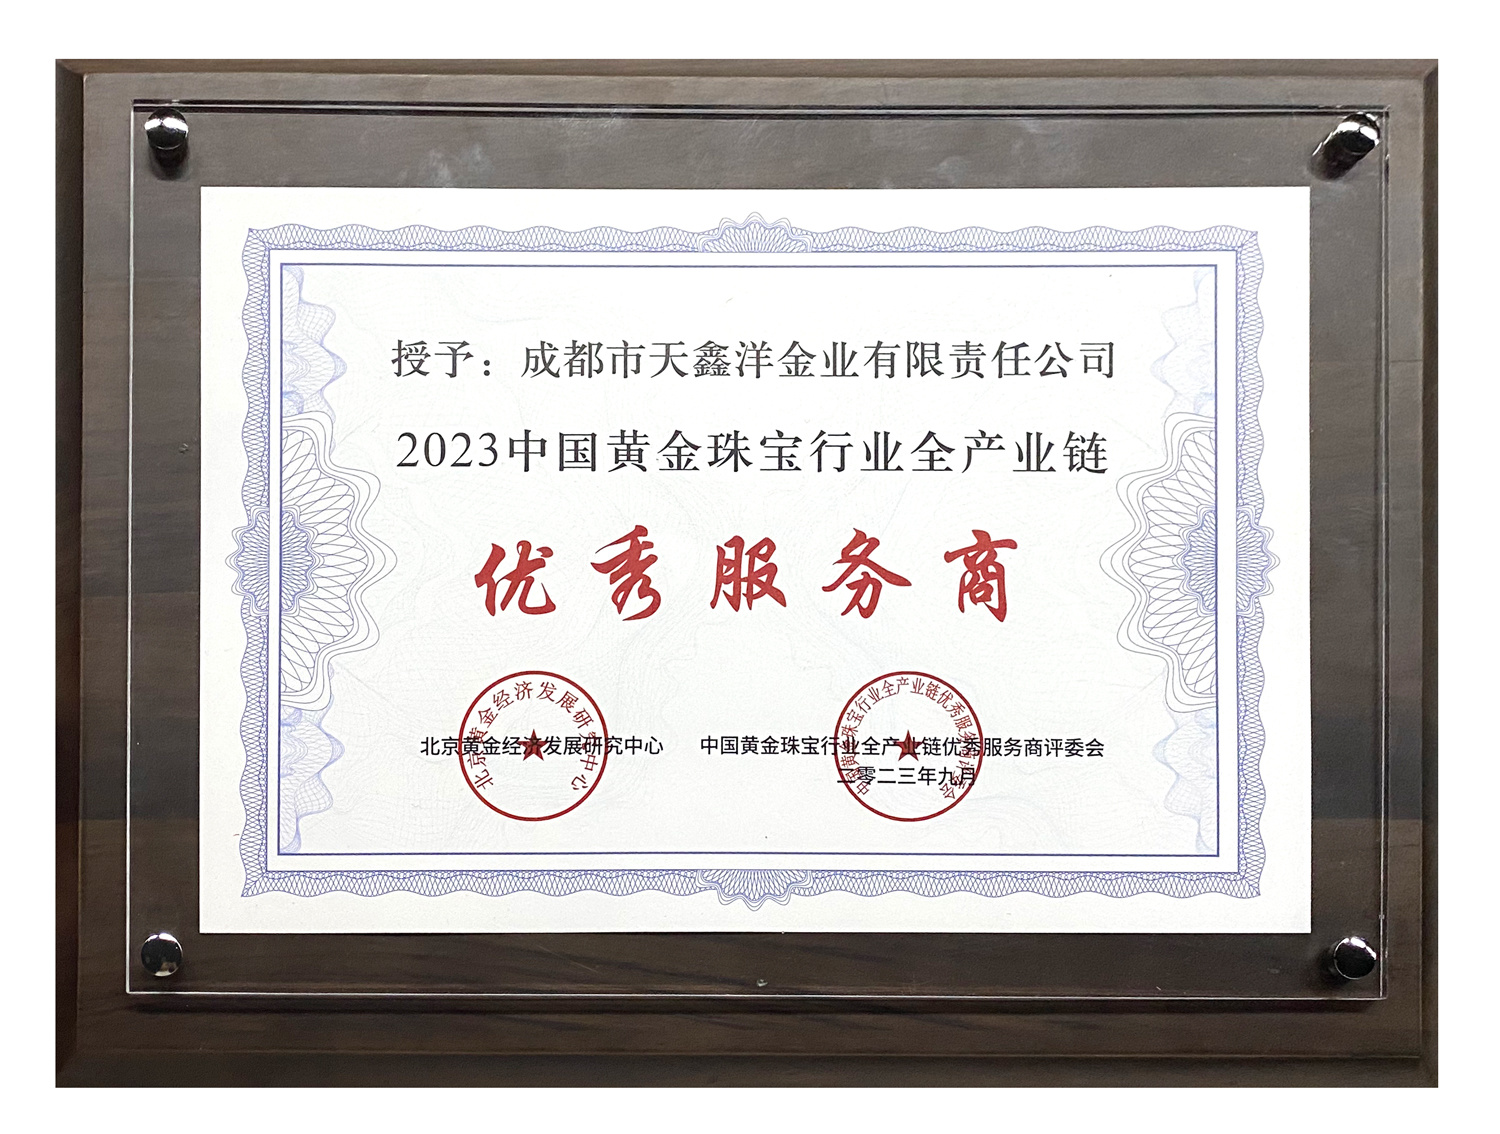 Tianxinyang was awarded the title of 